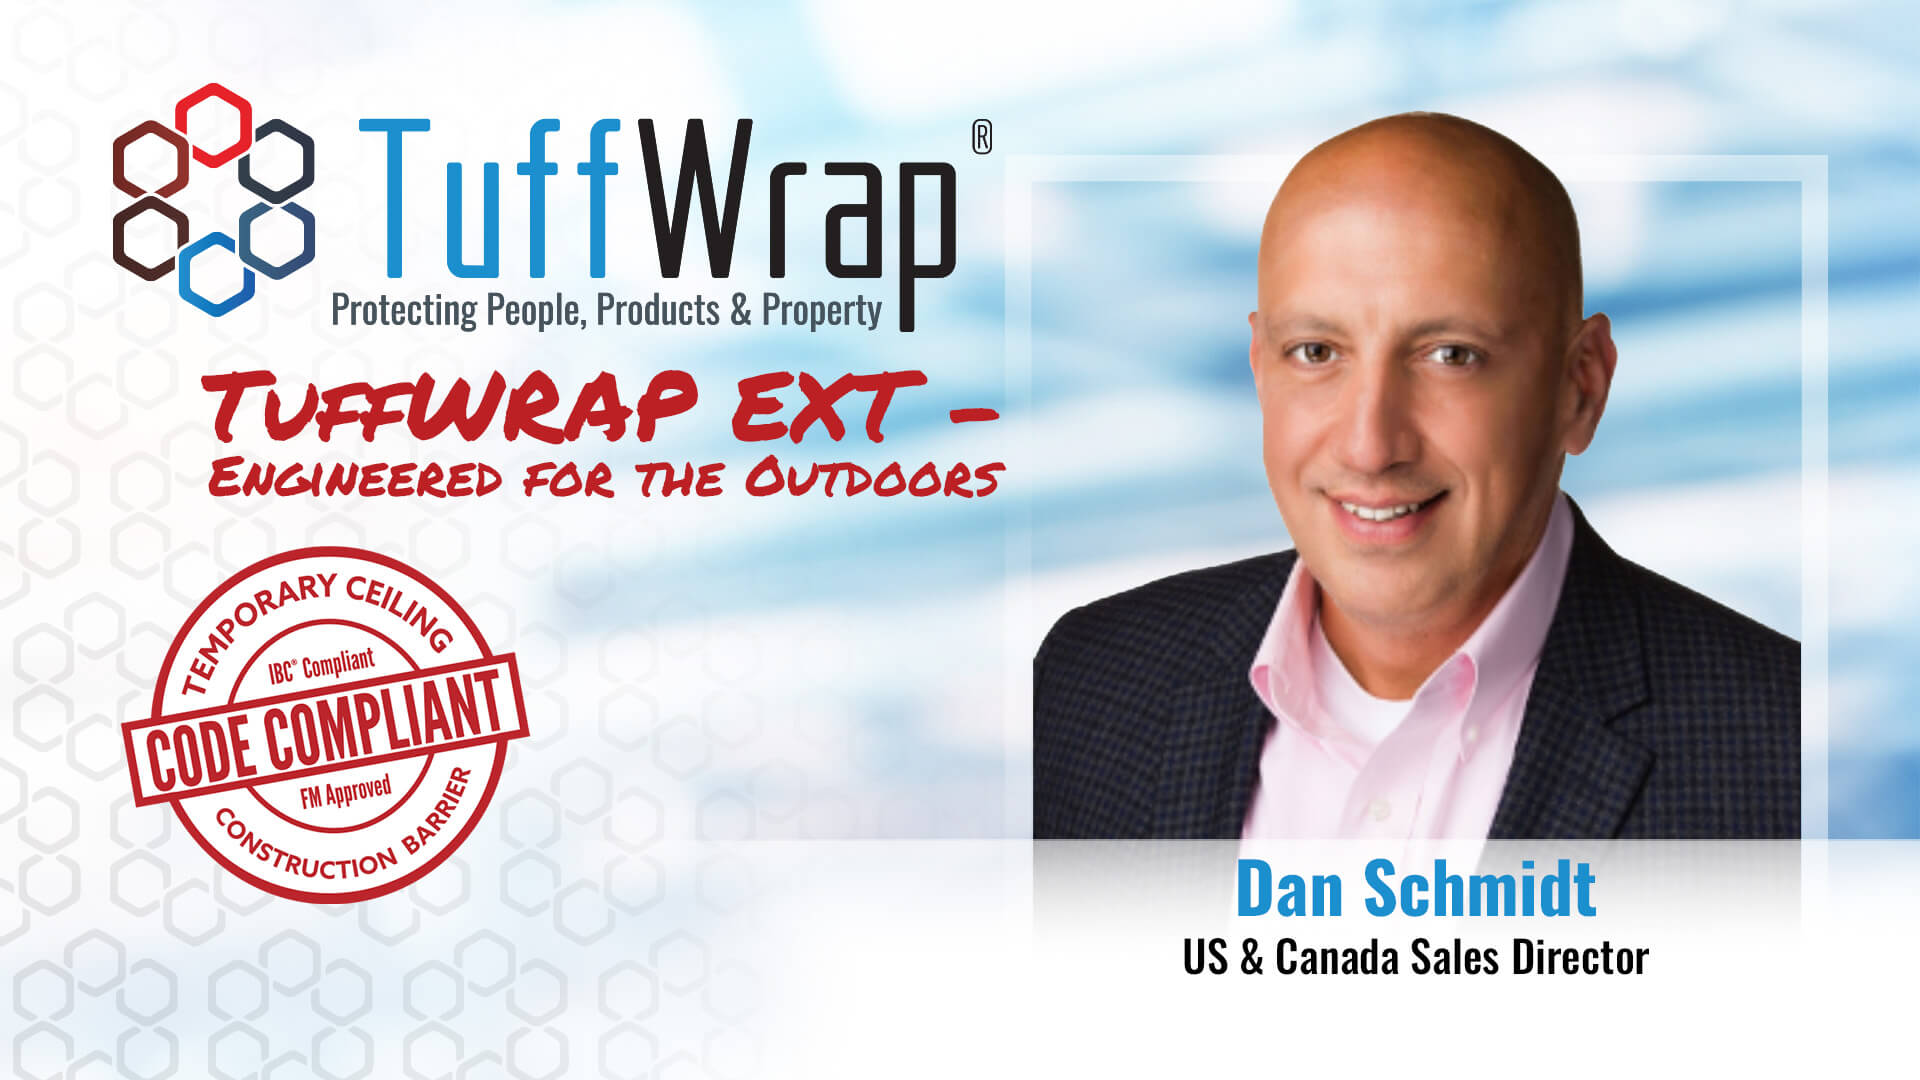 Ask The Expert with Dan Schmidt - 100% Code Compliant Interior Protection Solution